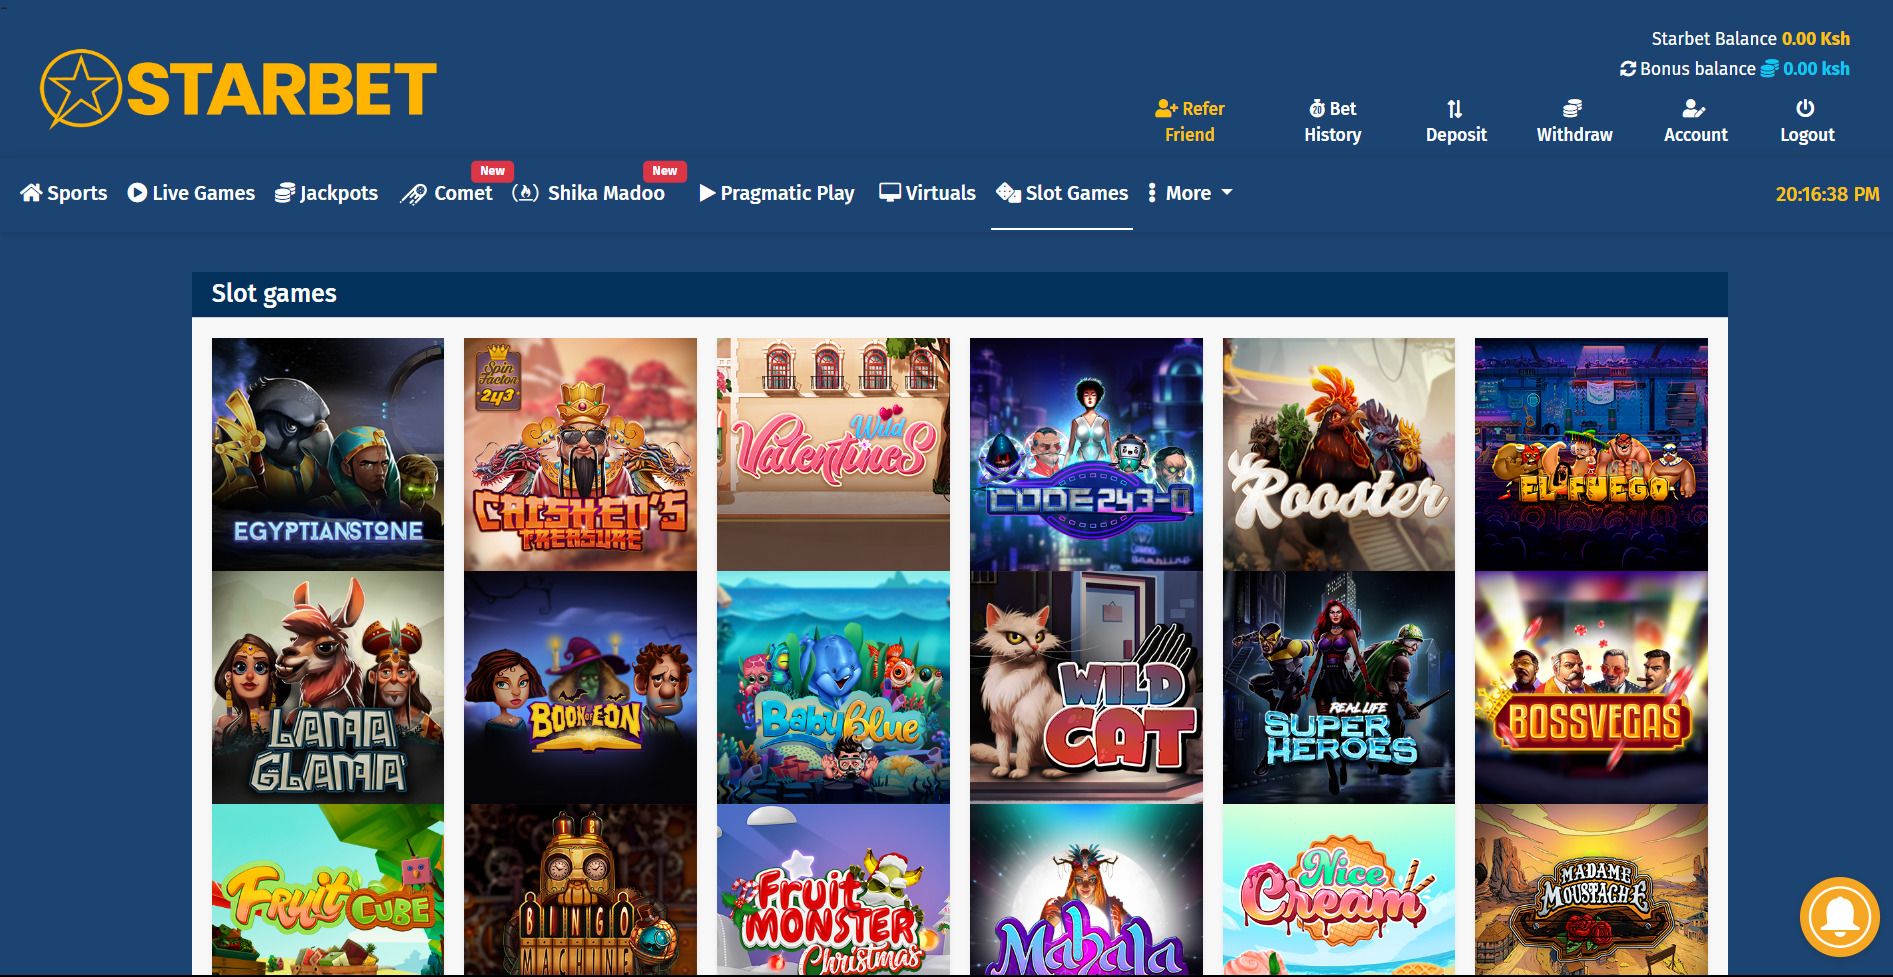 An image of the Starbet Casino games